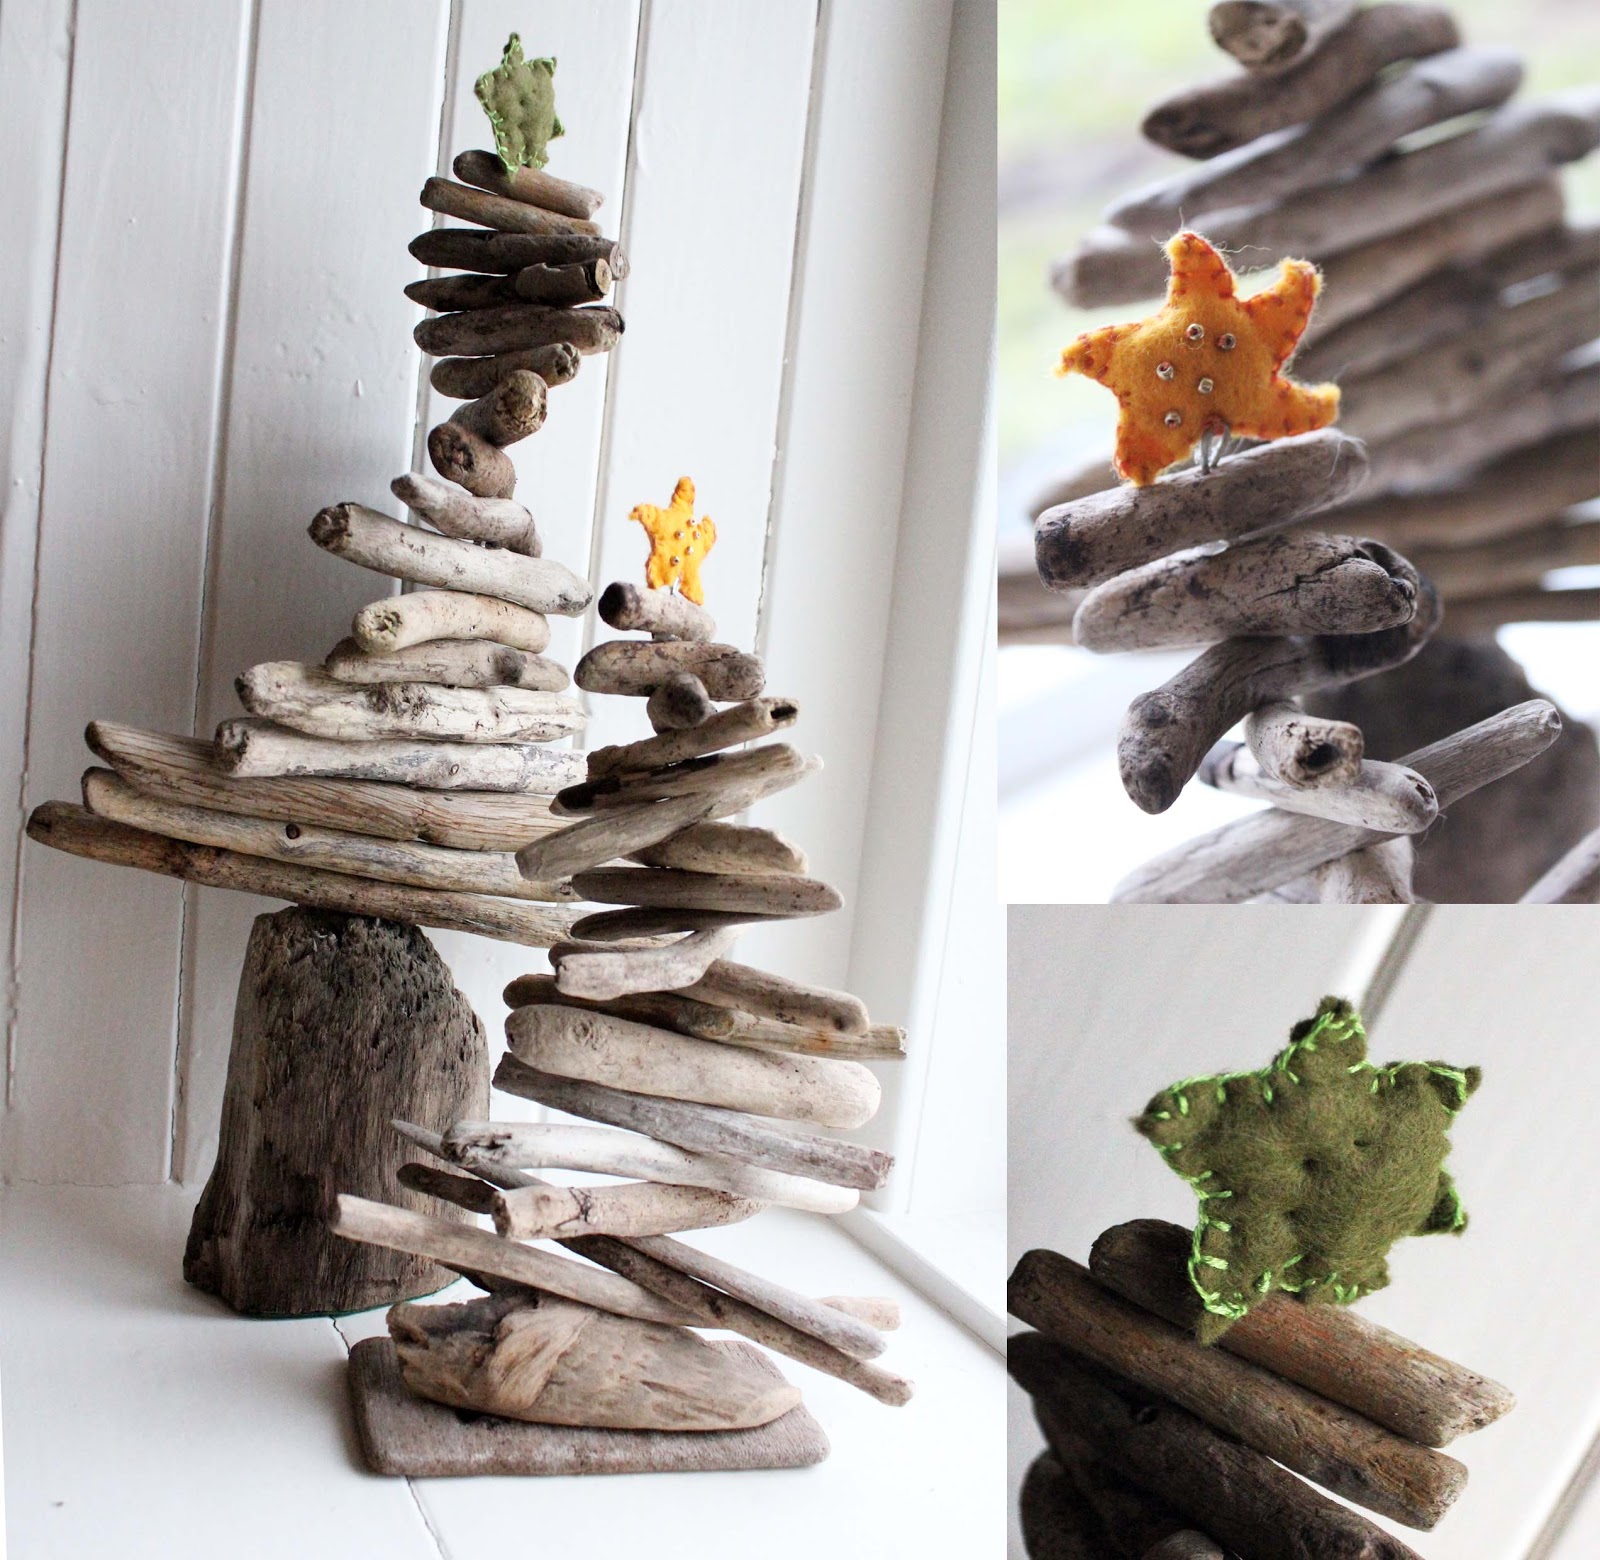 and driftwood Christmas trees to decorate with stars.